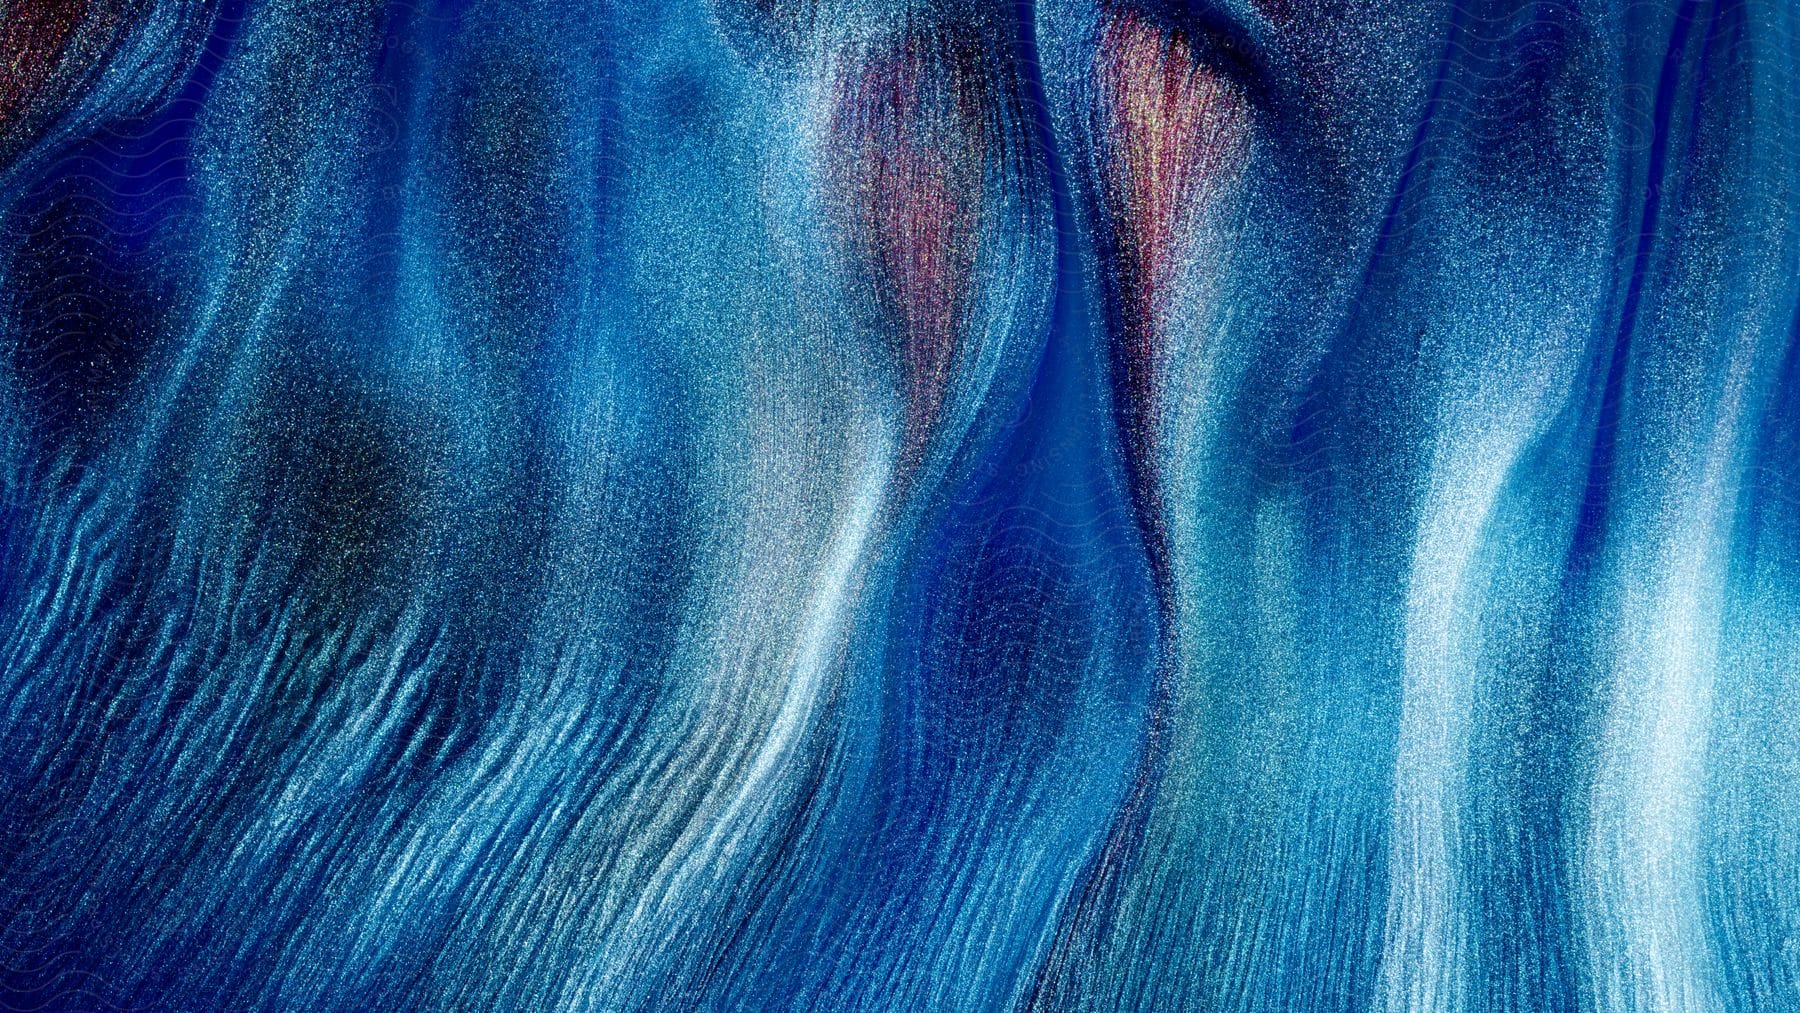 An abstract image with liquid blue shapes.